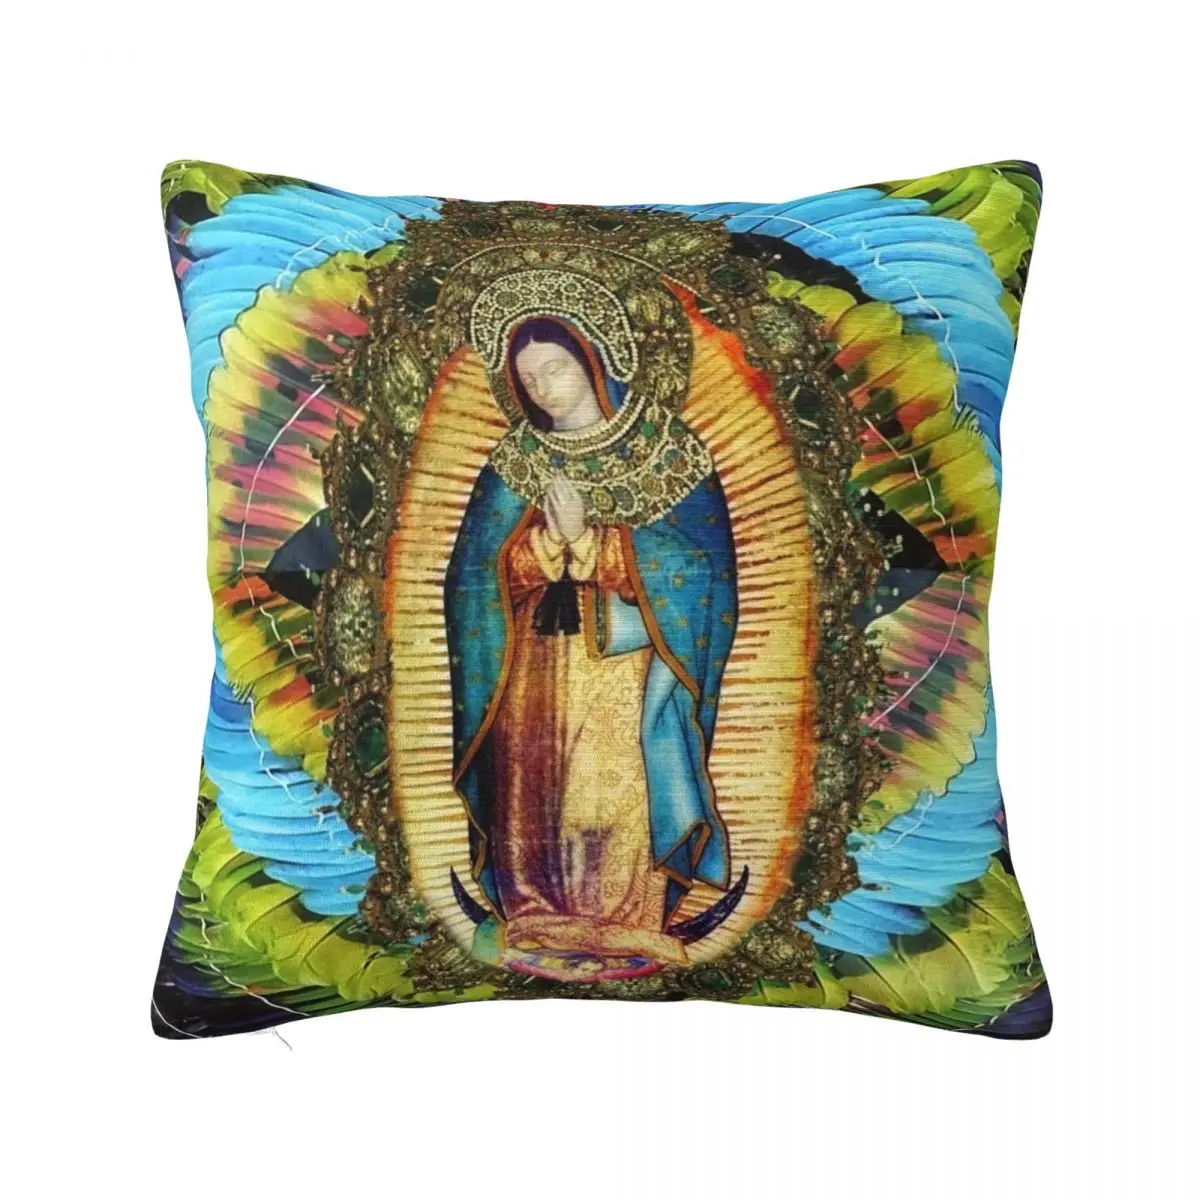 

Our Lady Of Guadalupe Mexican Virgin Mary Mexico Aztec Tilma Throw Pillow Case Cushion Covers Polyester Pillowcase Home 40x40cm